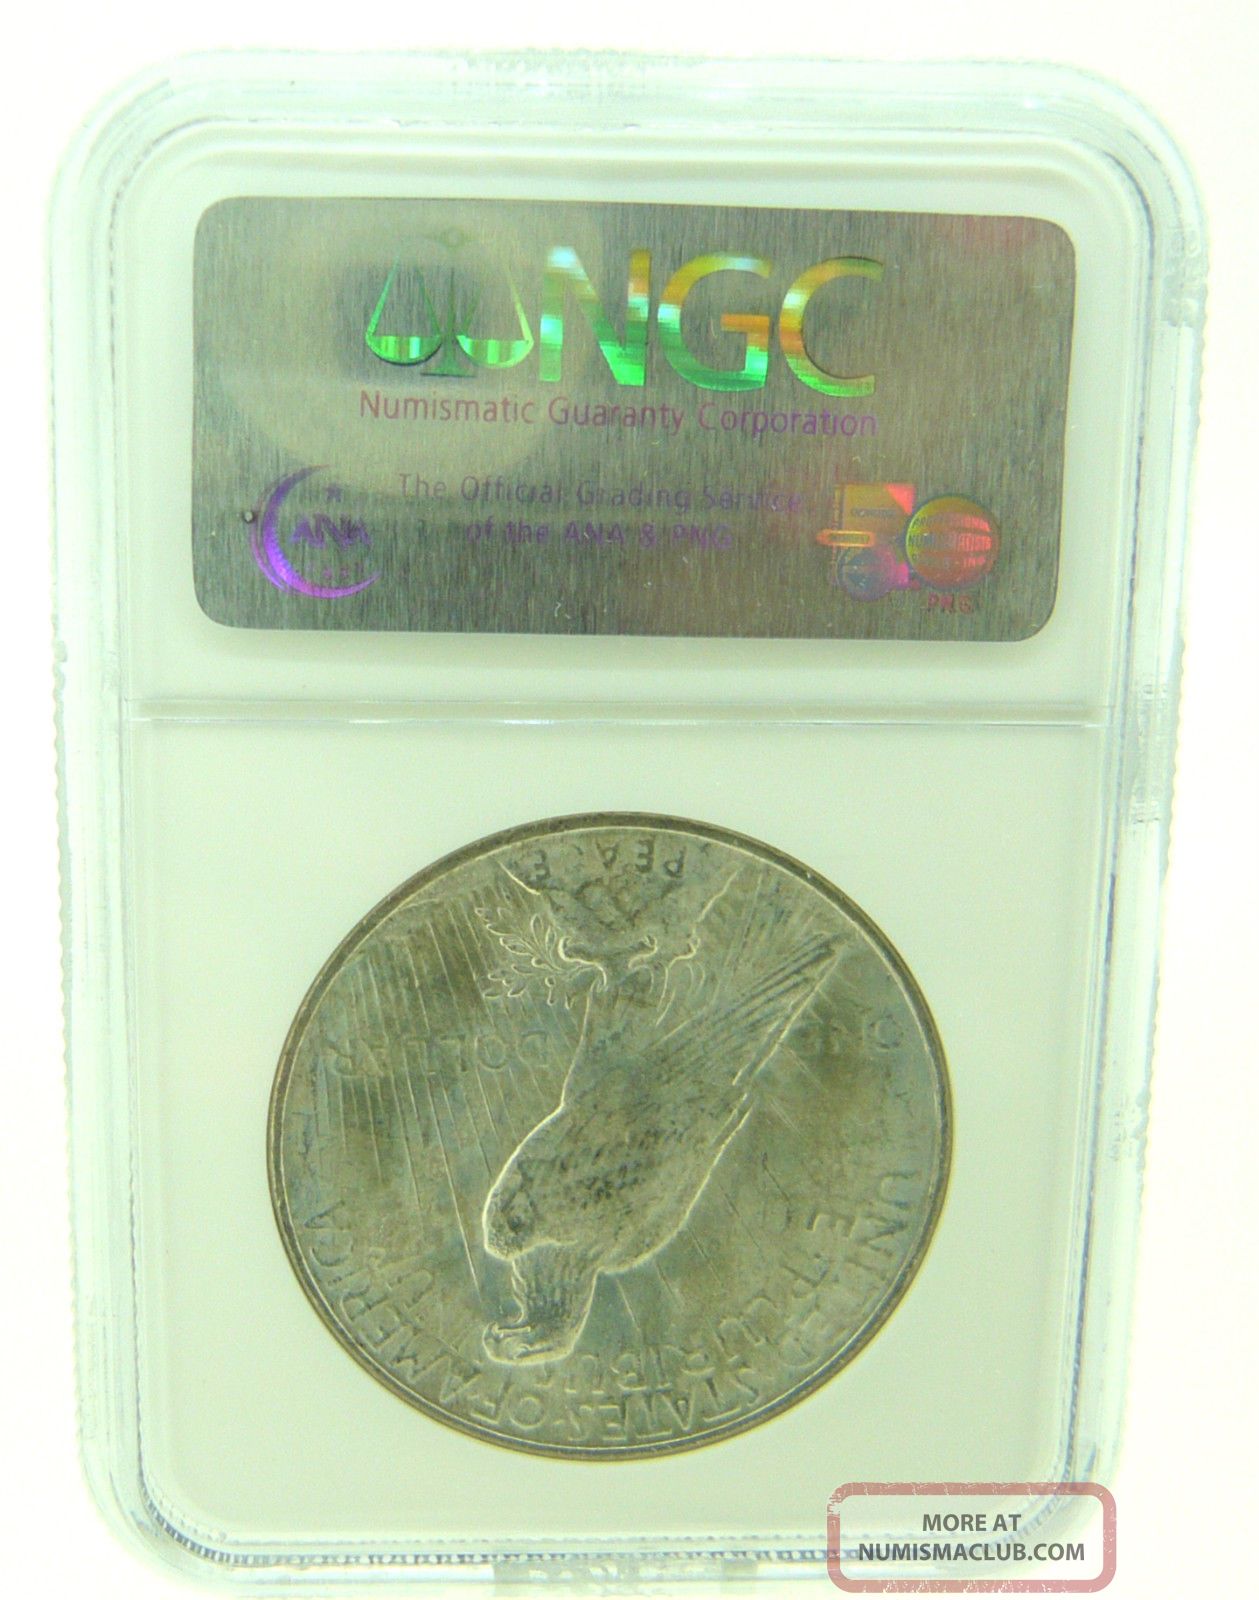 1922 $1 Ngc Ms63 Peace Silver Dollar (837)